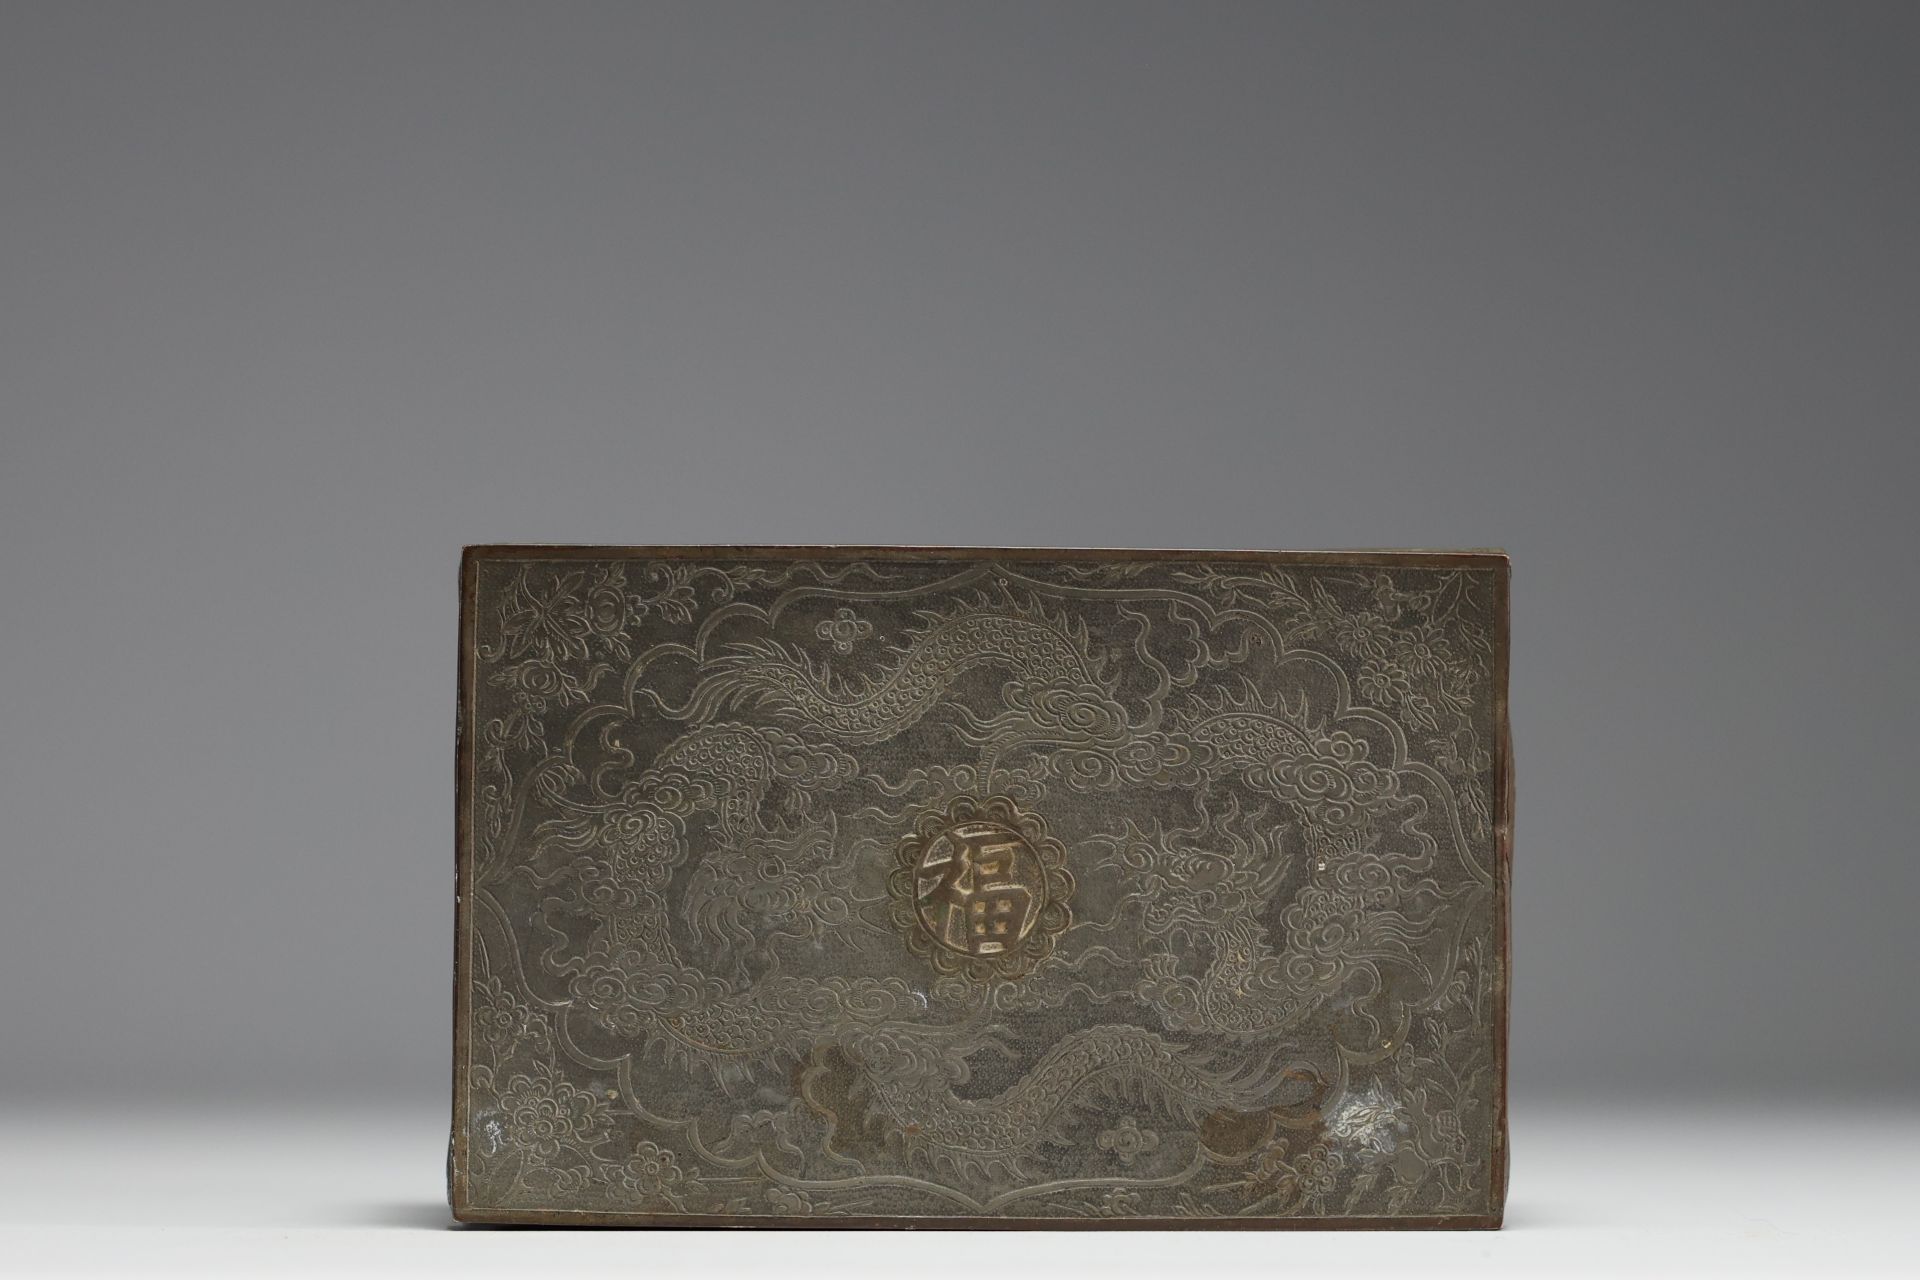 China - Pewter and copper tobacco drying case with dragon decoration, late 19th century. - Image 3 of 4